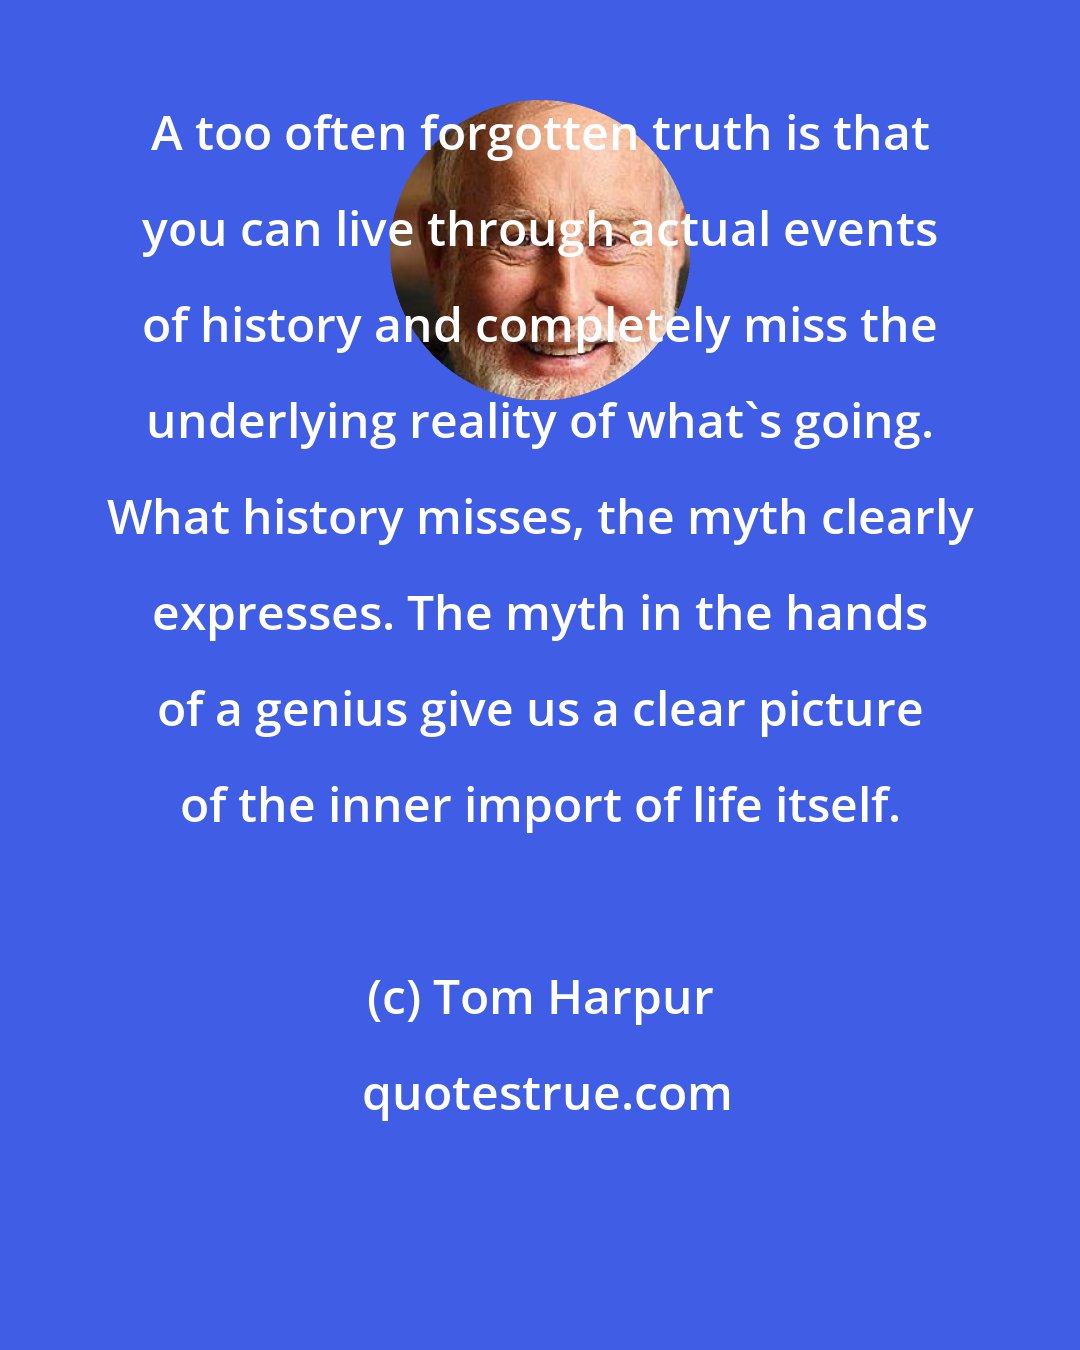 Tom Harpur: A too often forgotten truth is that you can live through actual events of history and completely miss the underlying reality of what's going. What history misses, the myth clearly expresses. The myth in the hands of a genius give us a clear picture of the inner import of life itself.